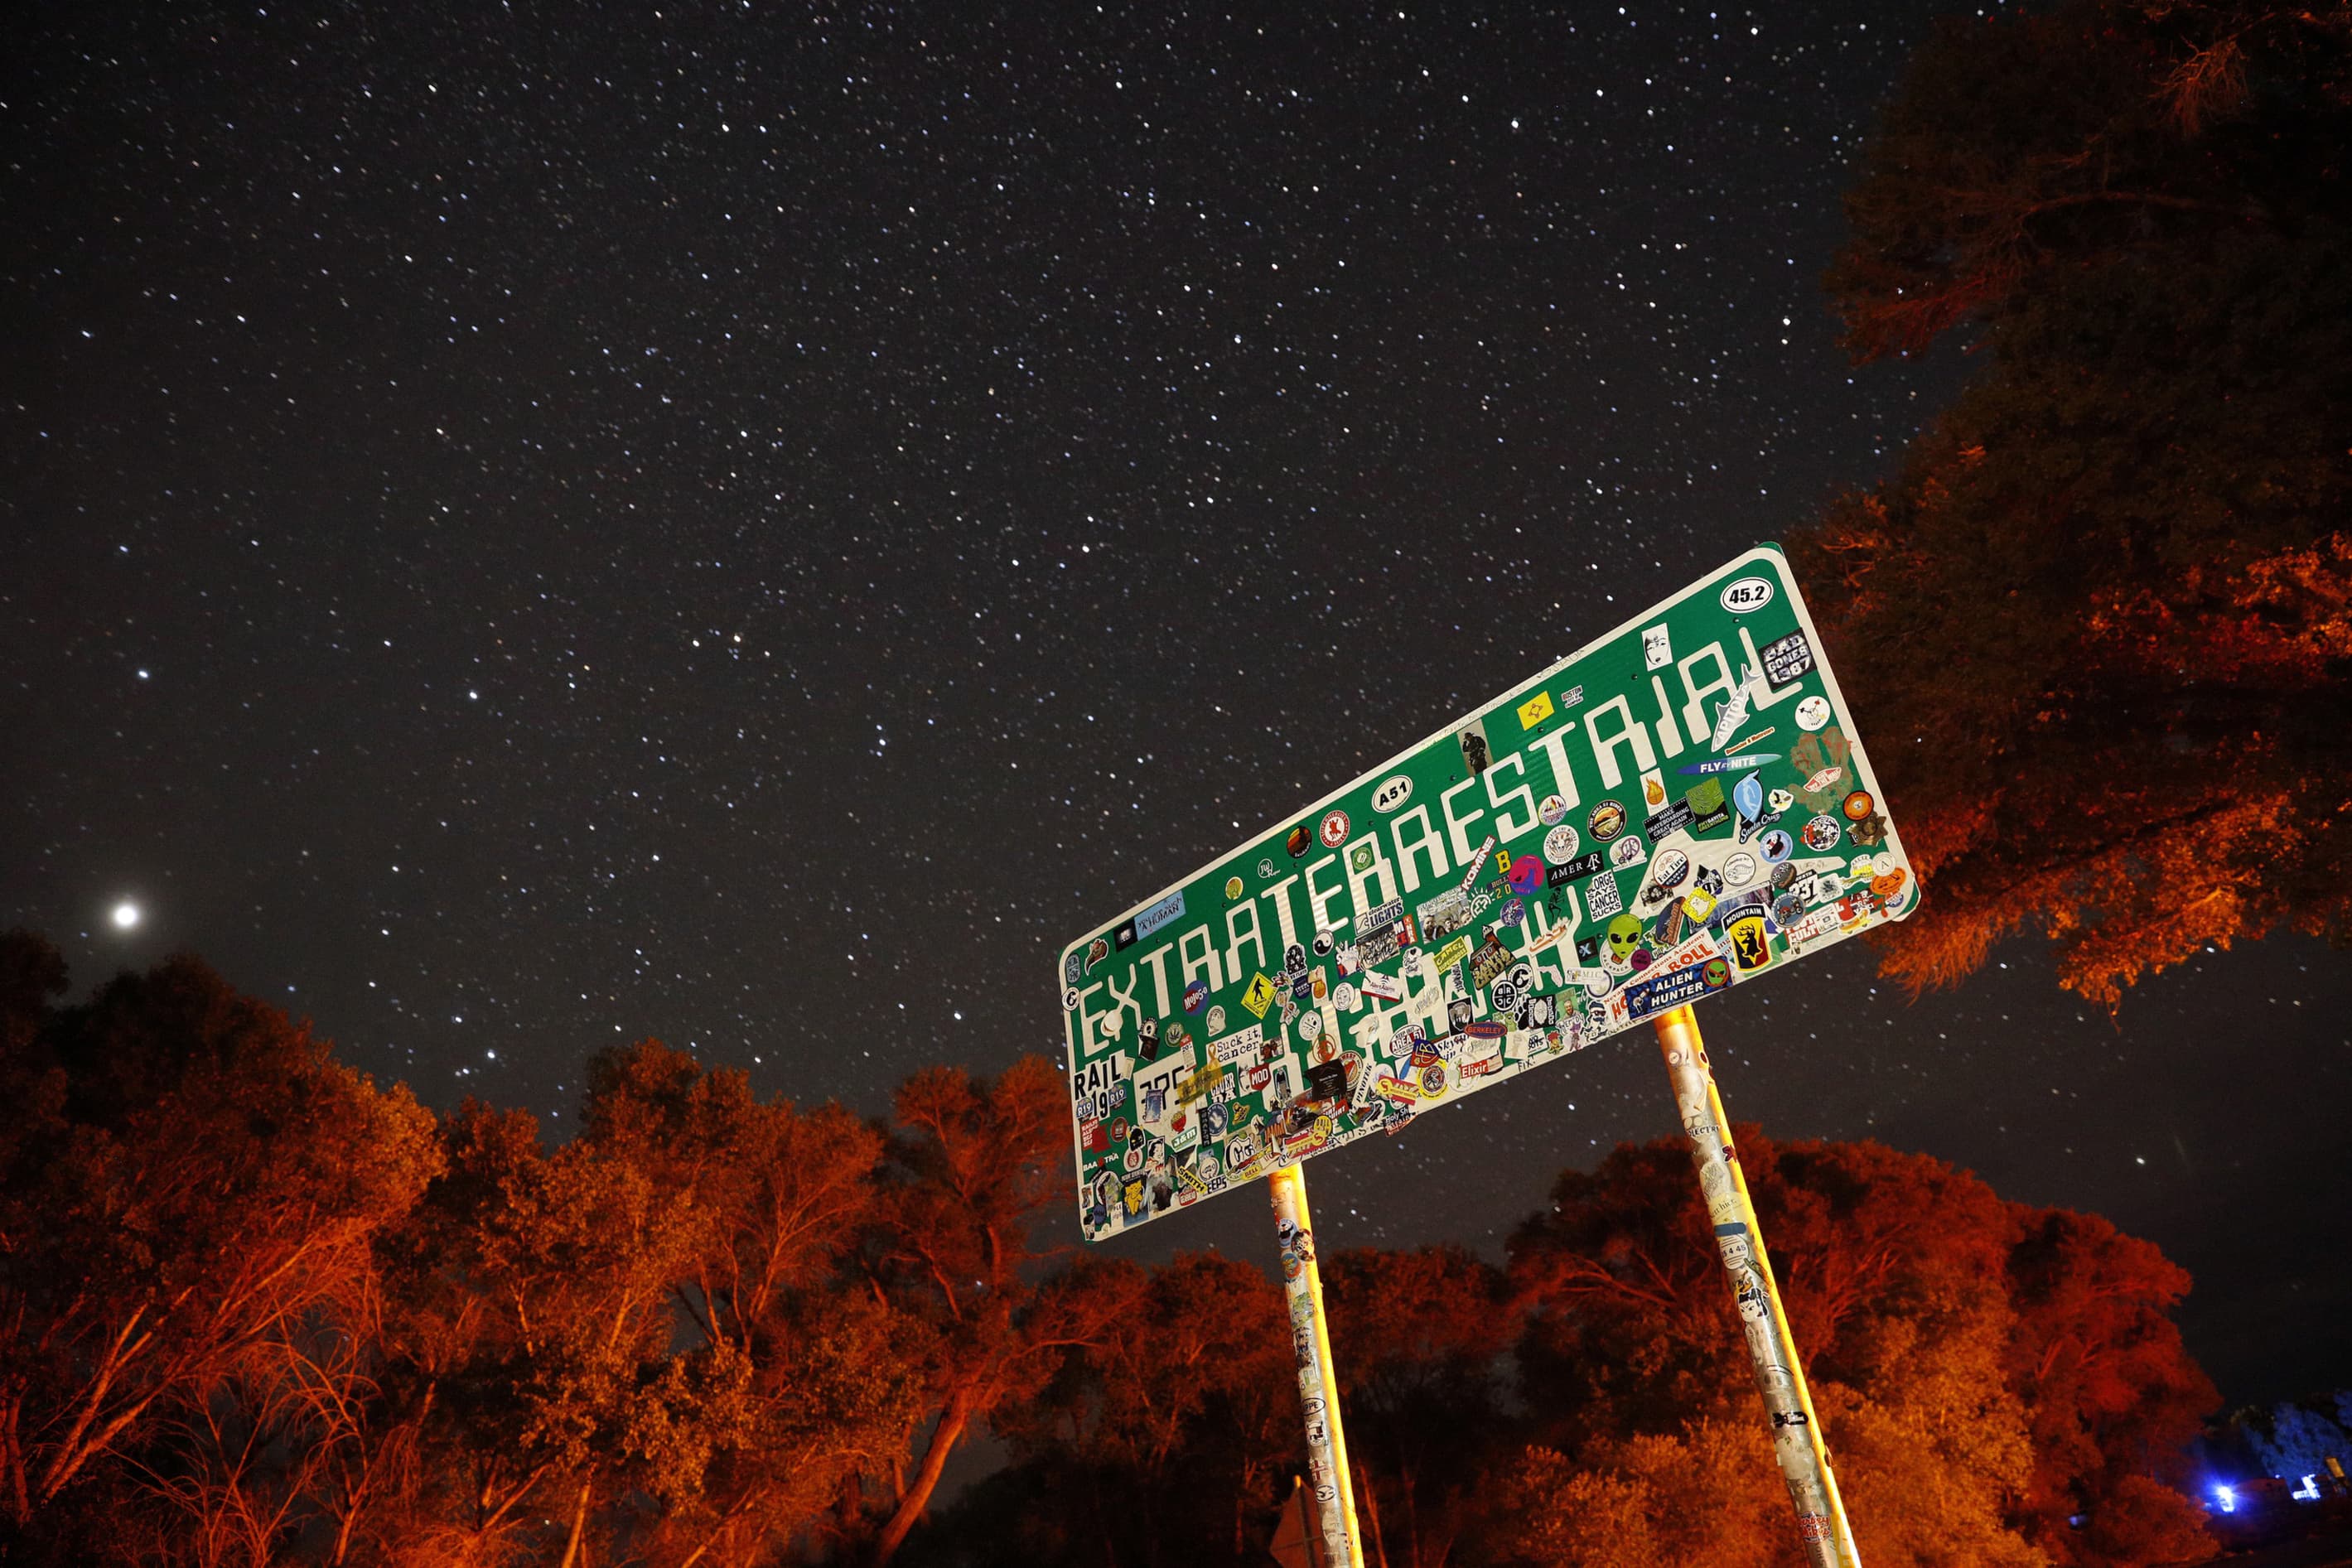 A sign advertises state route 375 as the Extraterrestrial Highway in Crystal Springs, Nev., on the way to Nevada Test and Training Range near Area 51. (John Locher/AP)